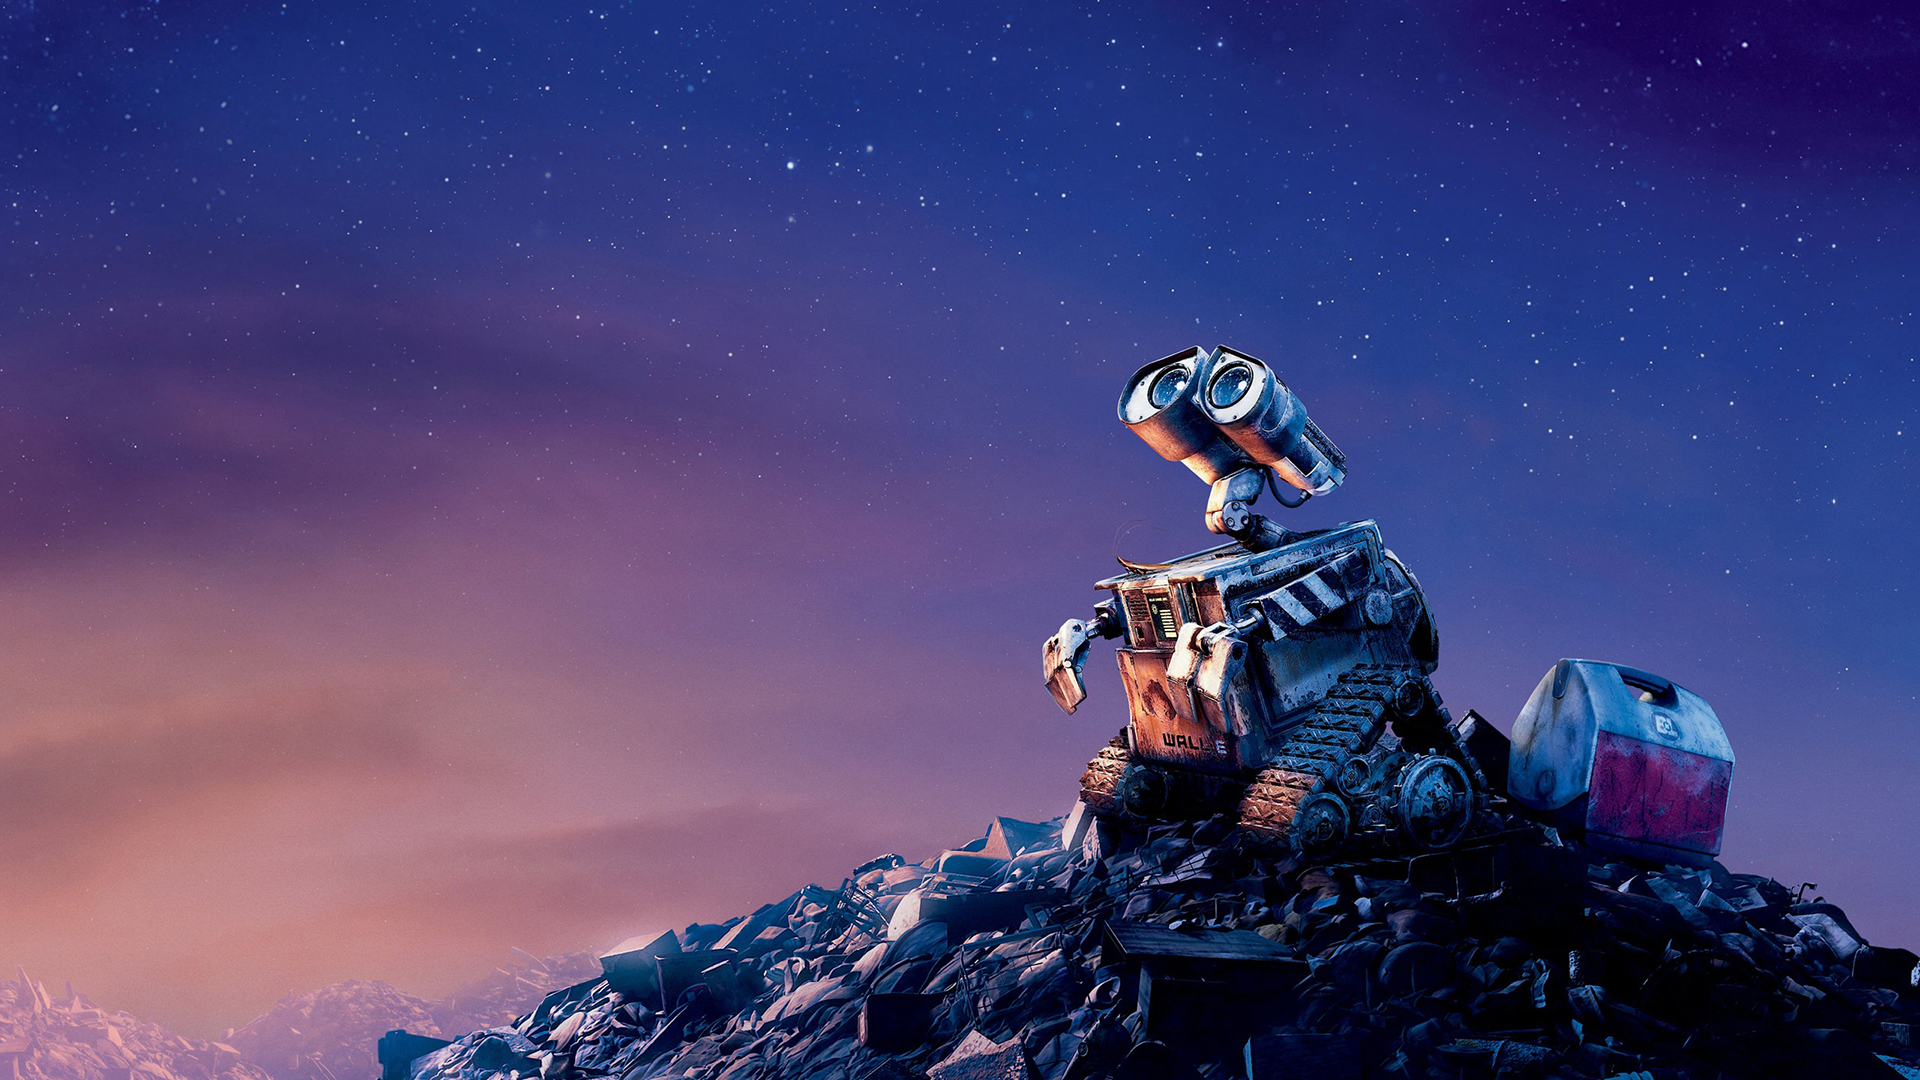 Wall-E for 1920 x 1080 HDTV 1080p resolution